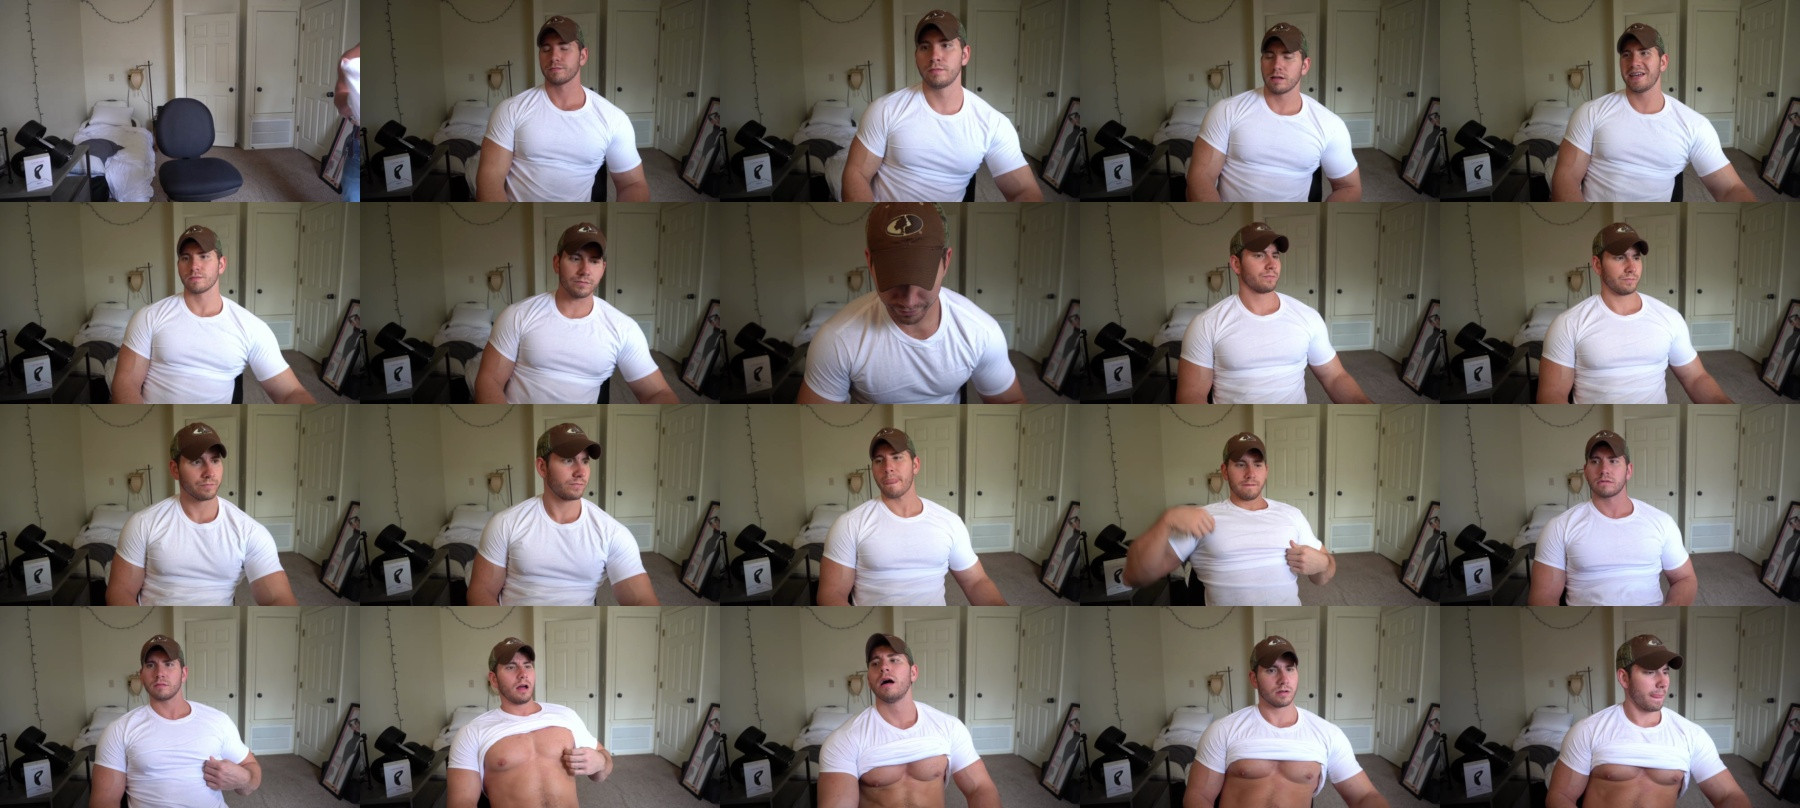 Hotmuscles6t9 Show CAM SHOW @ Chaturbate 09-03-2021